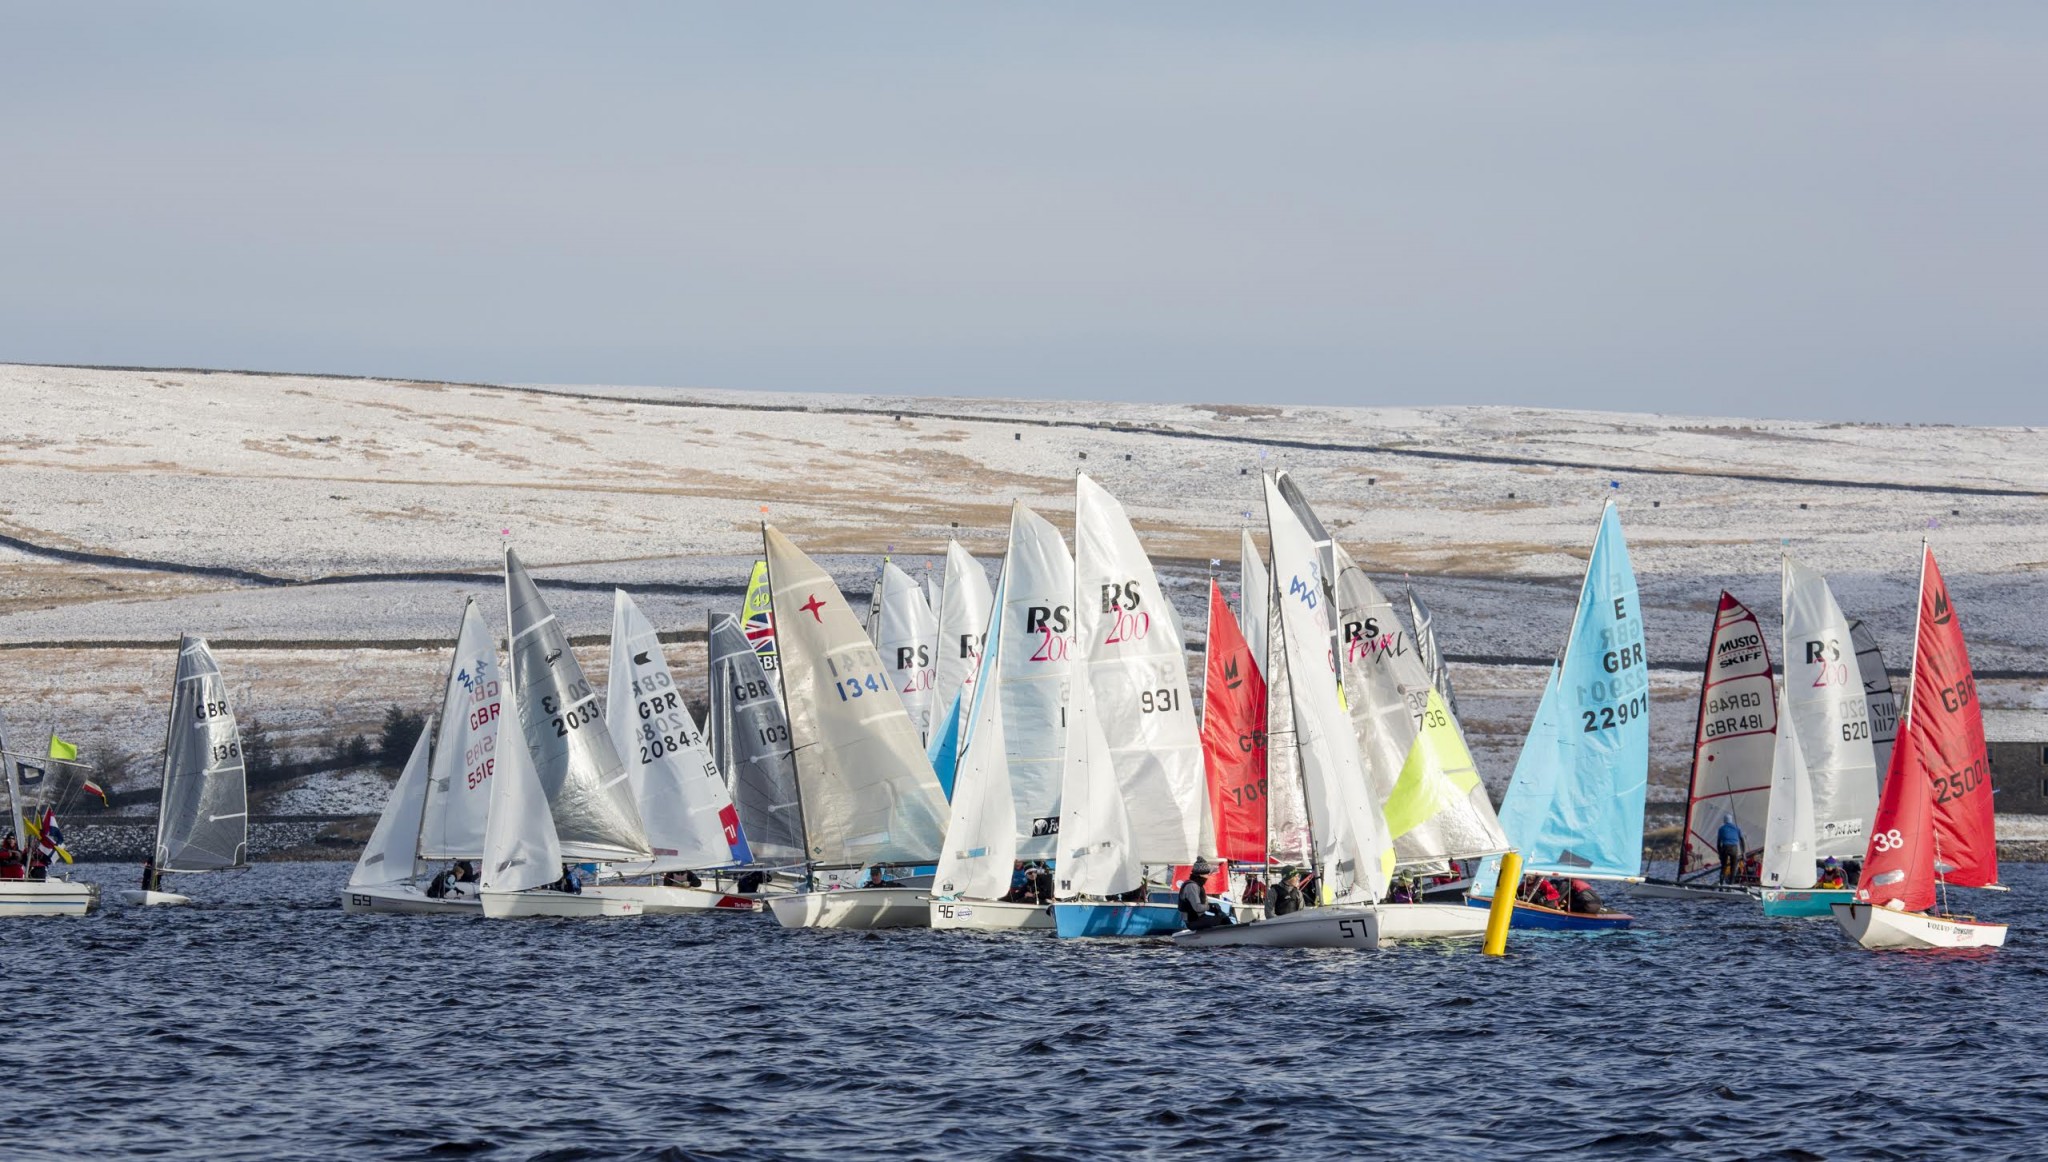 press-release-10th-edition-of-selden-sailjuice-winter-series-brings-a-family-focus